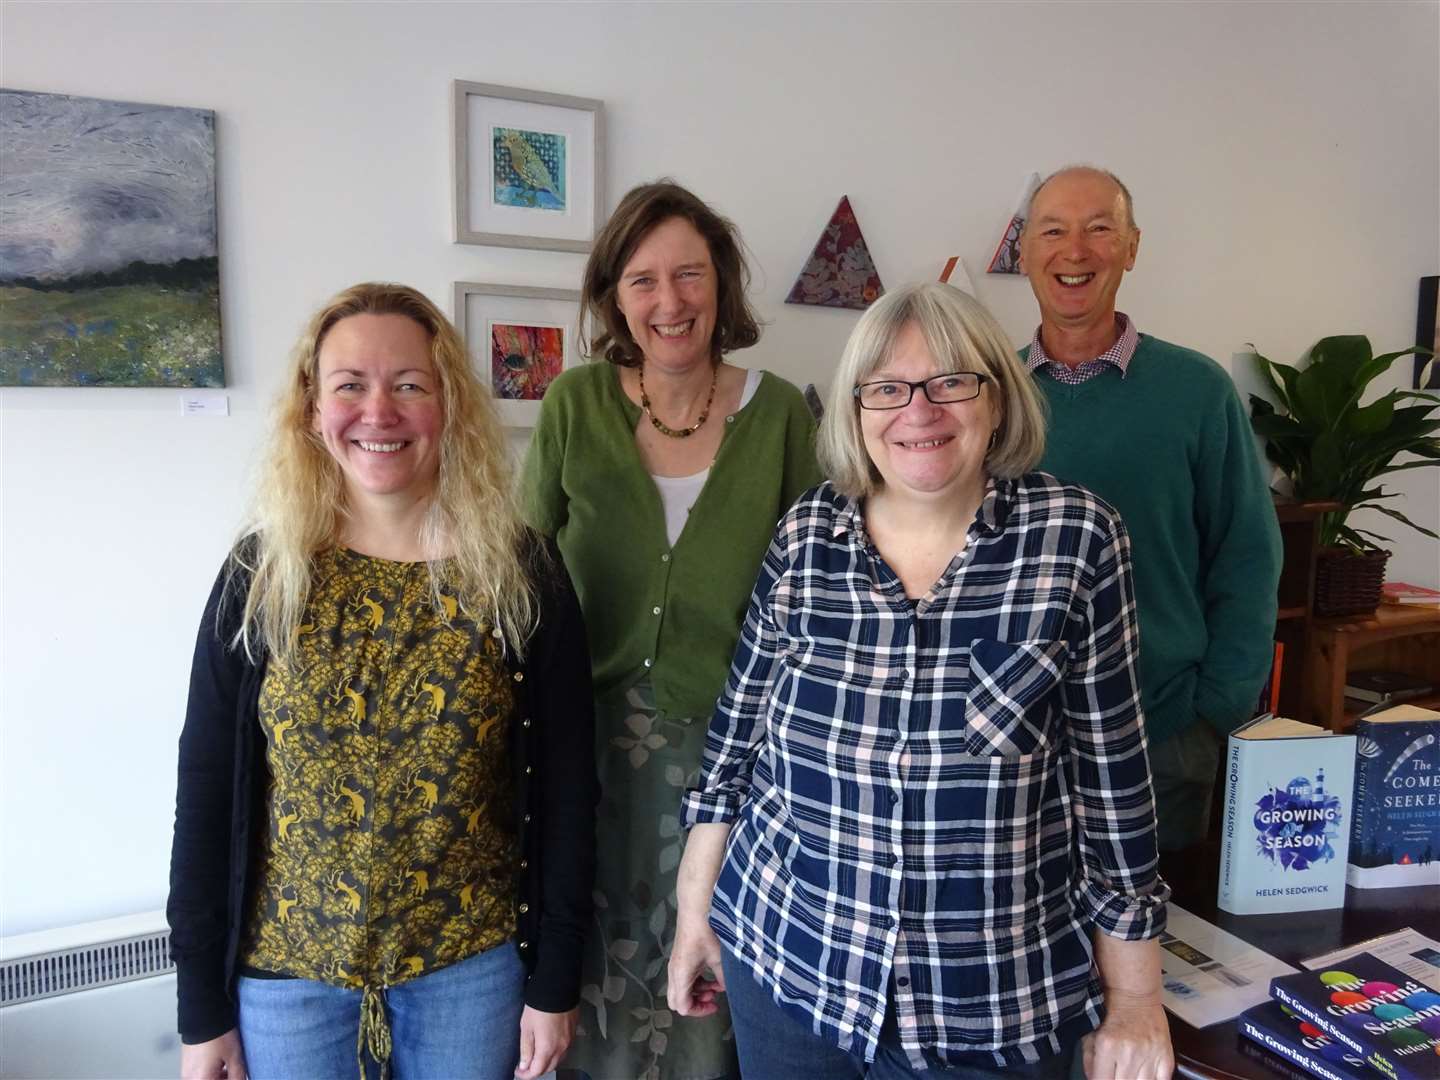 The four authors offering a helping hand are (l-r) Helen Sedgwick, Liz Treacher, Ceitidh Hutton and Philip Paris..